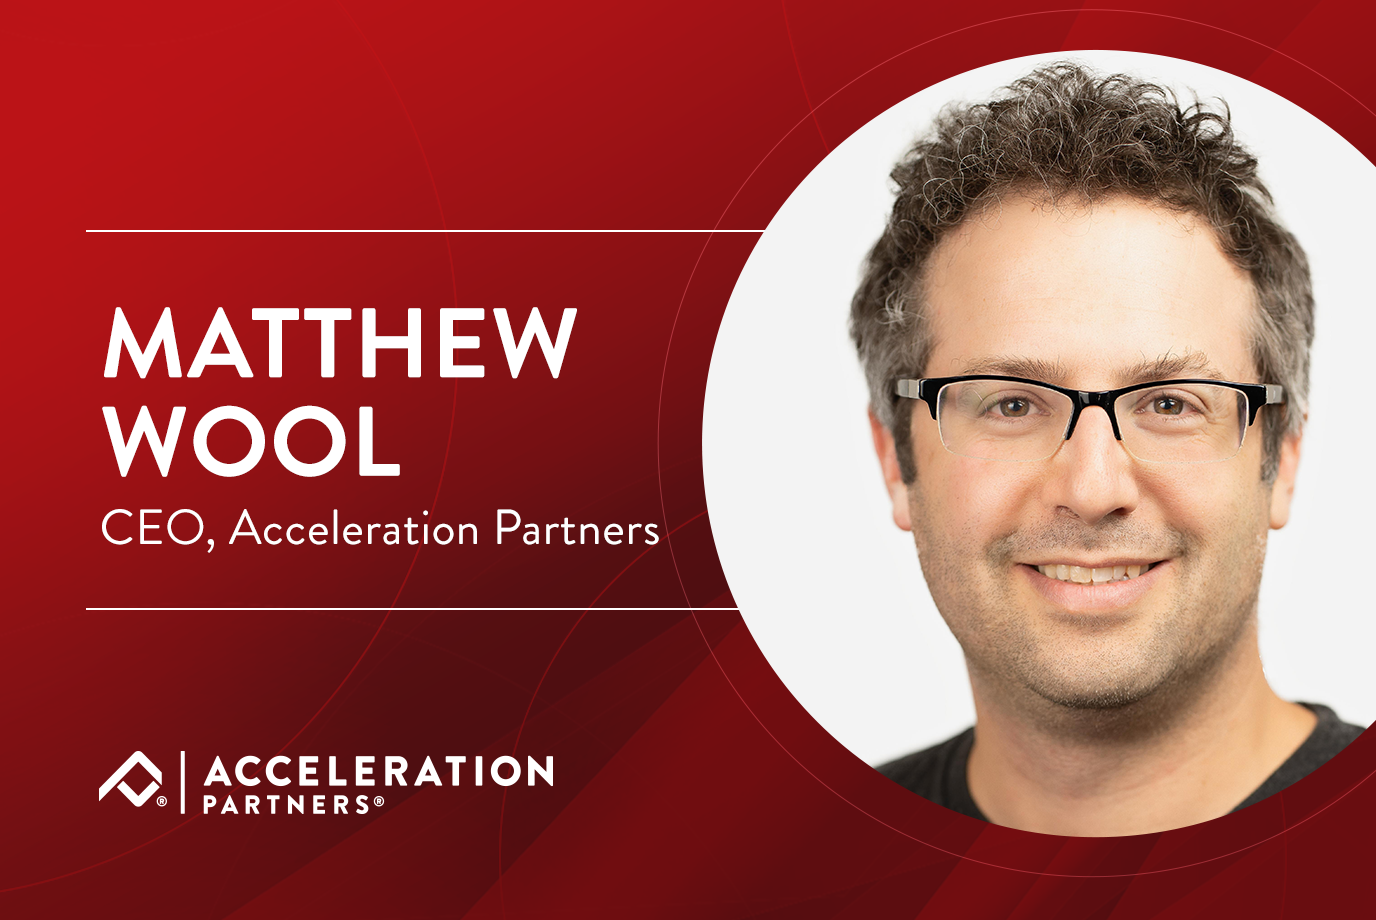 Introducing Acceleration Partners’ New CEO